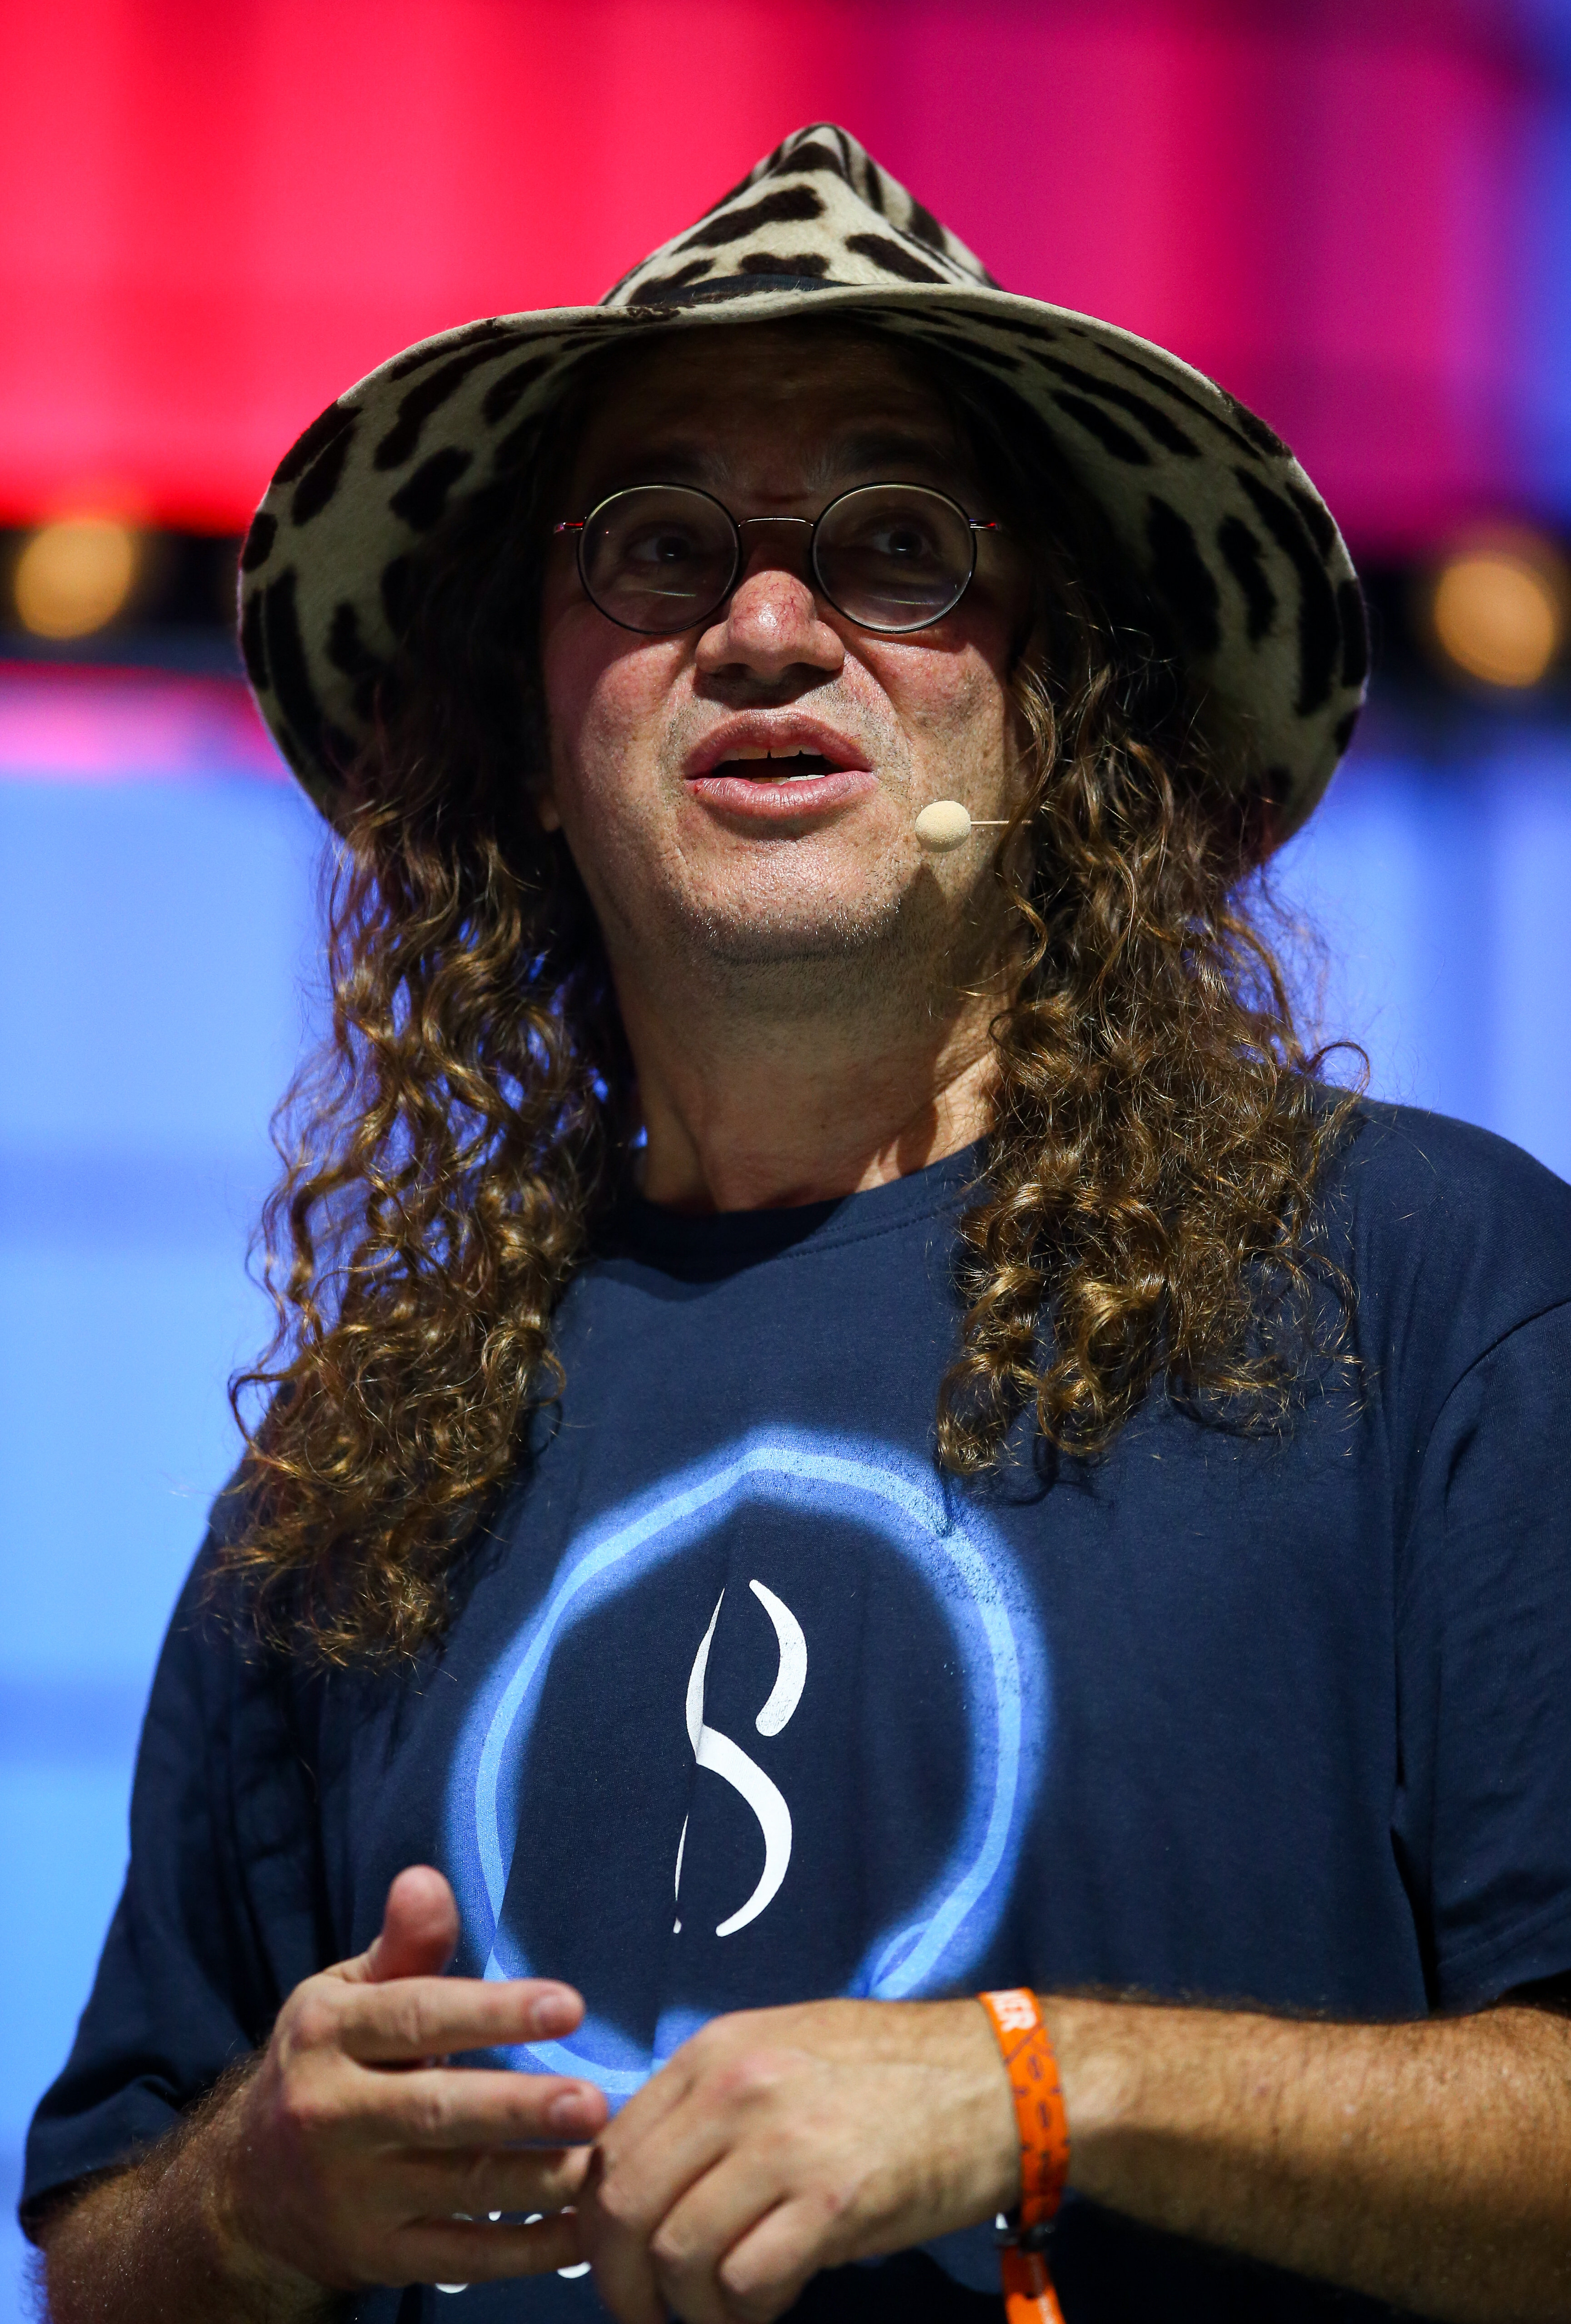 Goertzel giving a talk at the Web Summit 2019 at the Altice Arena in Lisbon, Portugal